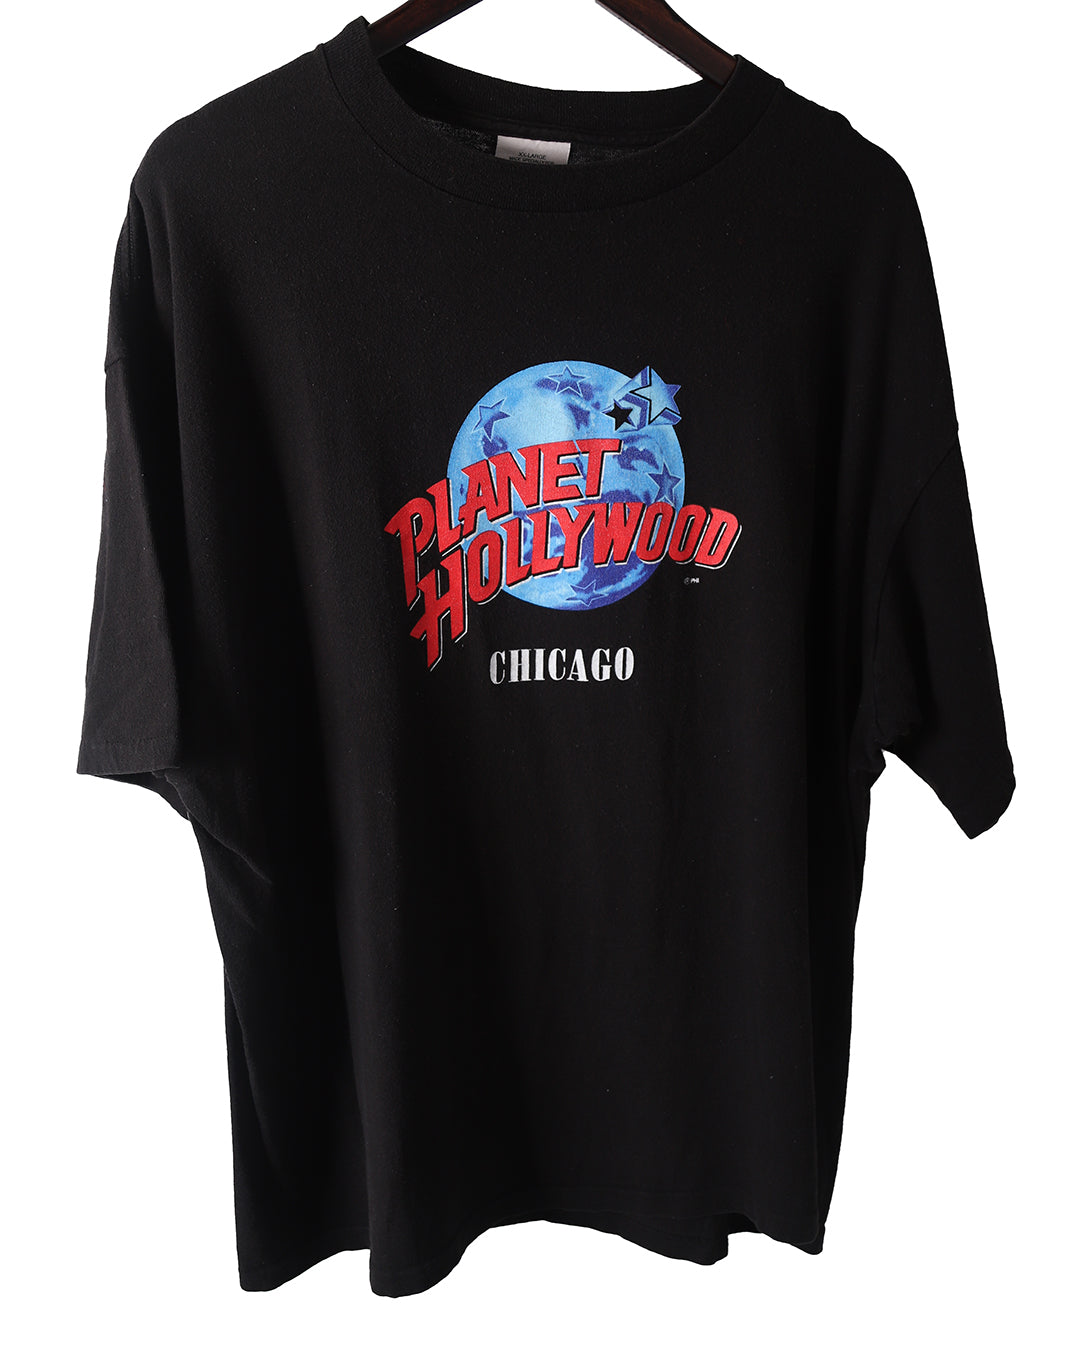 Planet Hollywood Tee - "Chicago"